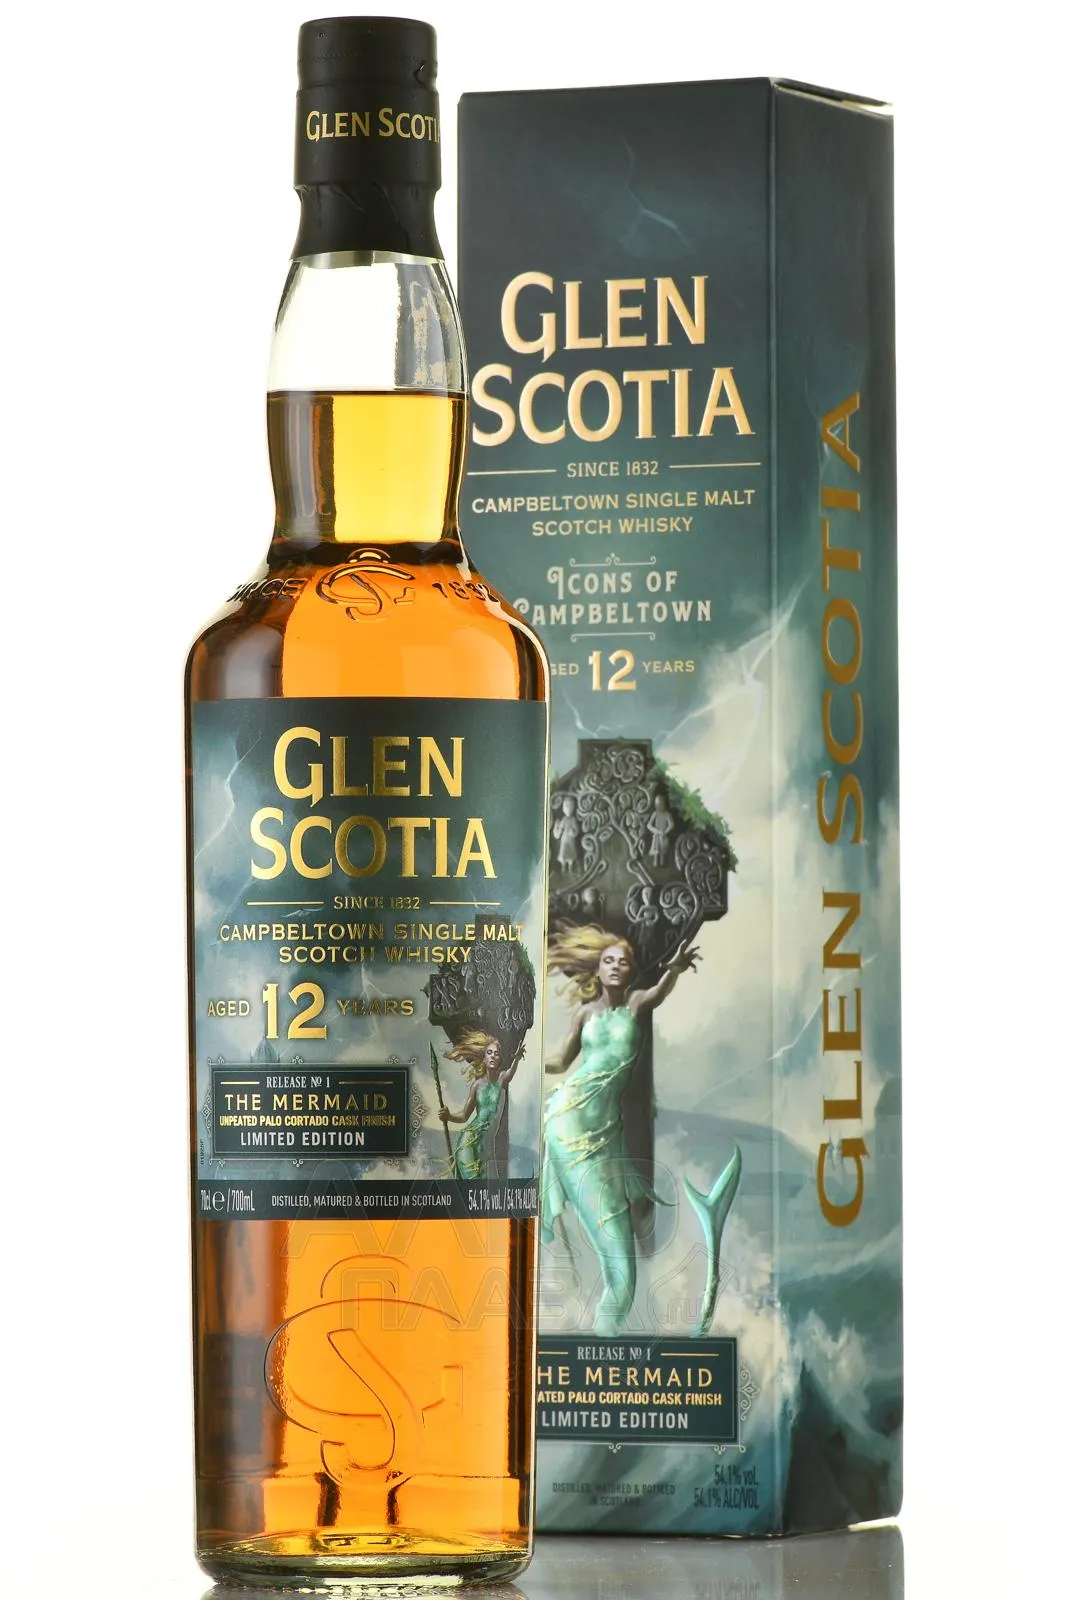 GLEN SCOTIA 12 YEARS THE MERMAID LIMITED EDITION